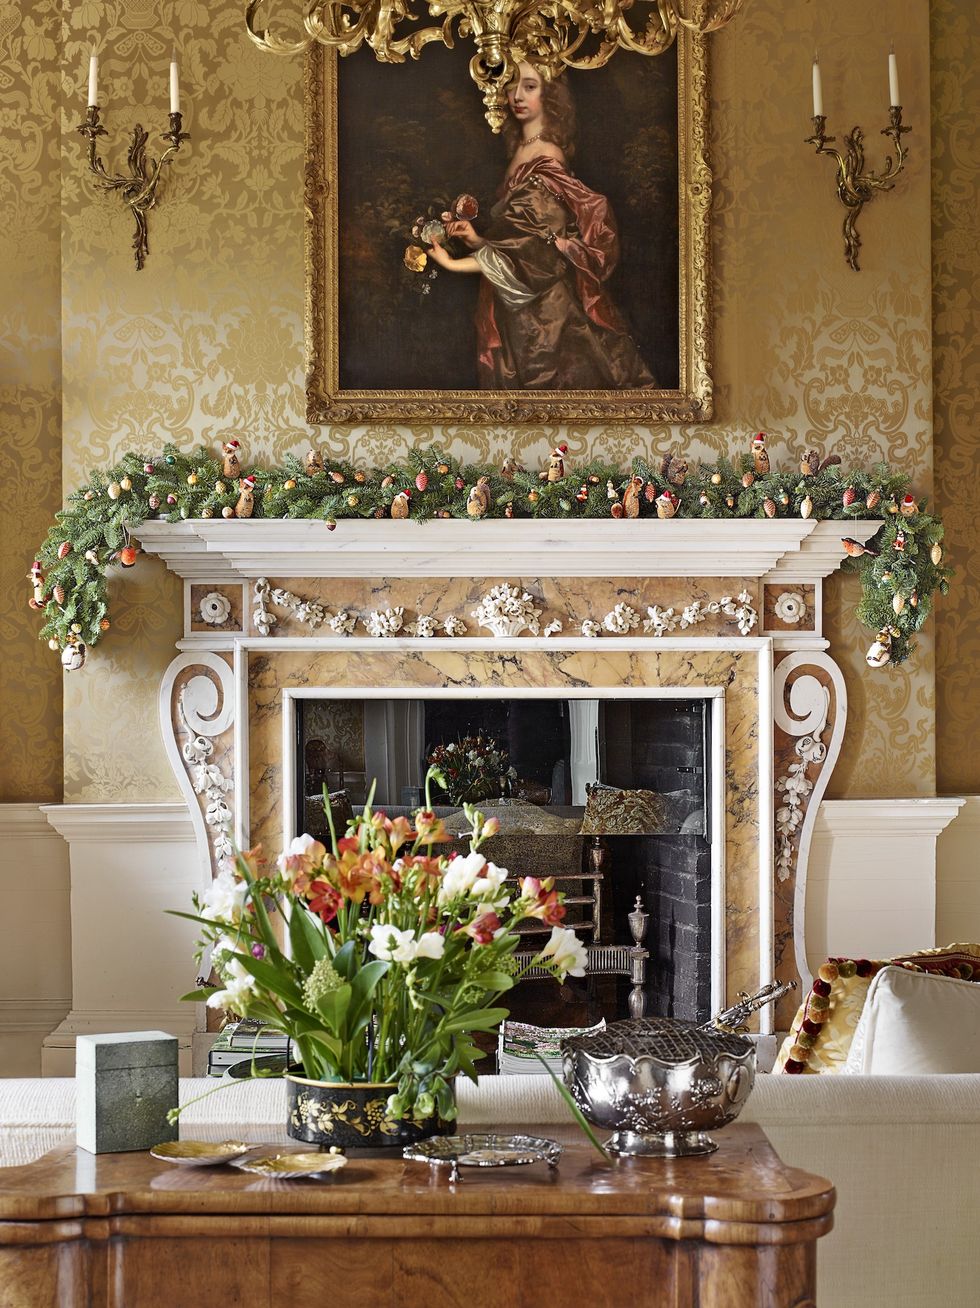 A Look Inside a Fully Bedecked Georgian Manor at Christmas